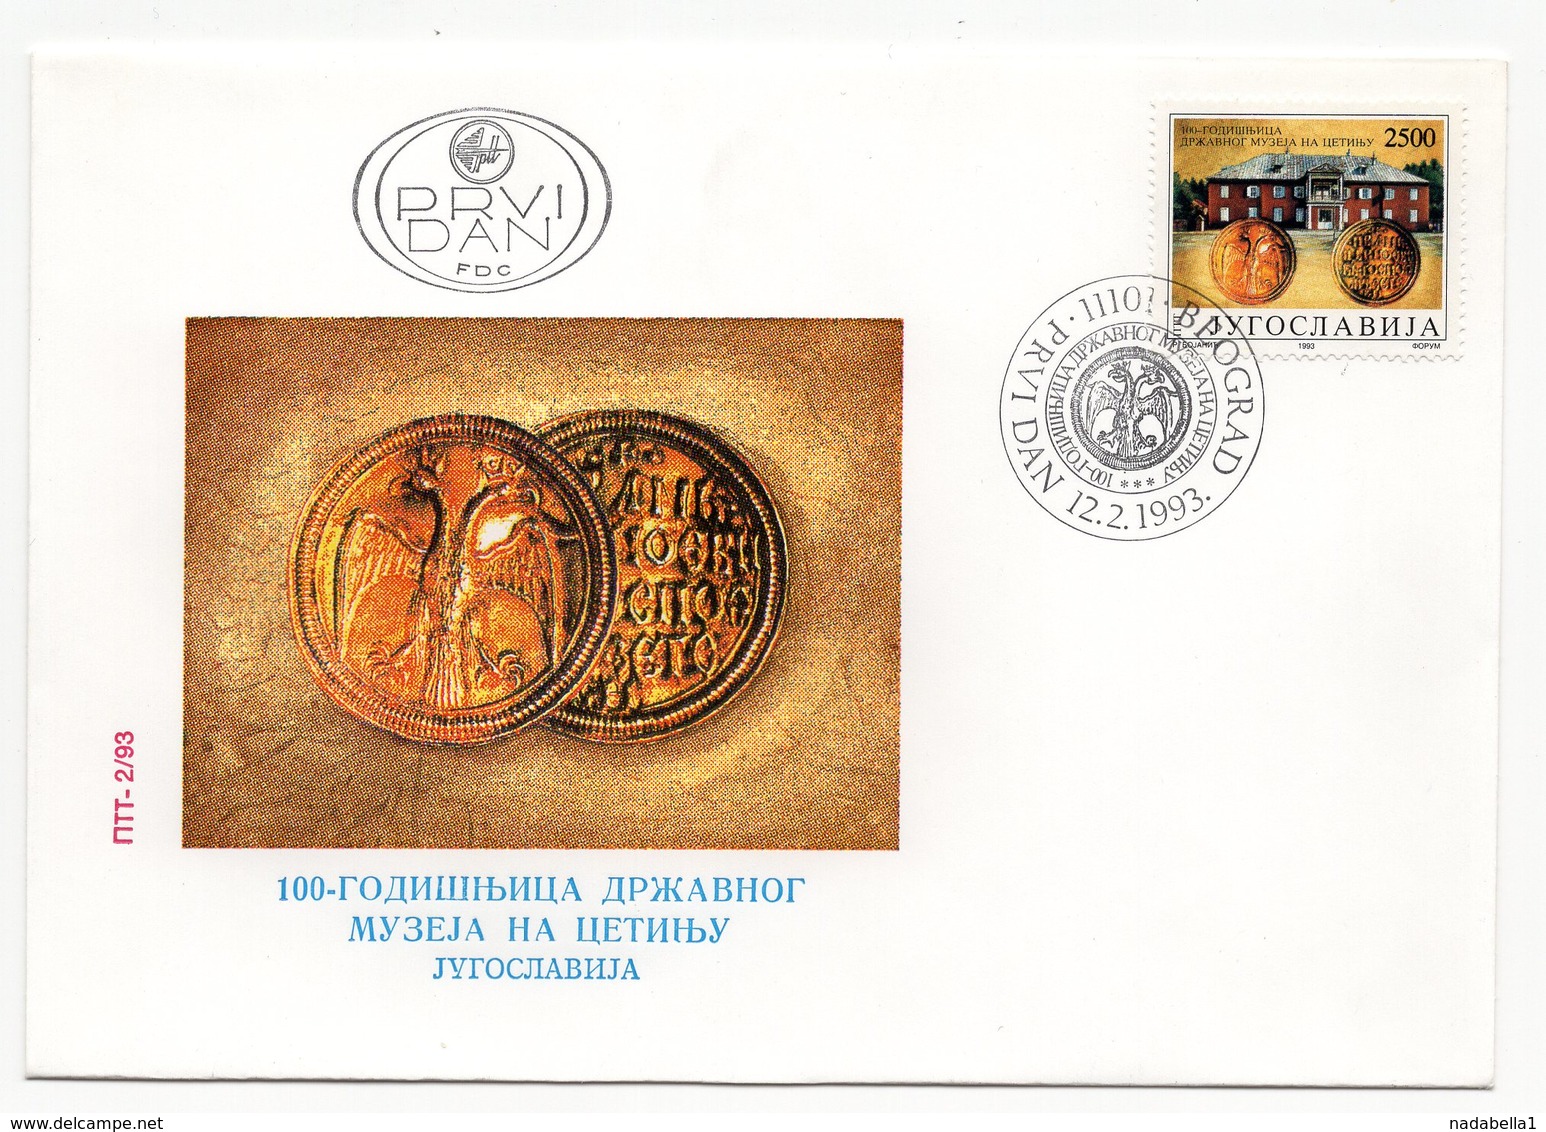 YUGOSLAVIA, FDC, 12.02.1993, COMMEMORATIVE ISSUE: 100 YEARS OF NATIONAL MUSEUM CETINJE - FDC